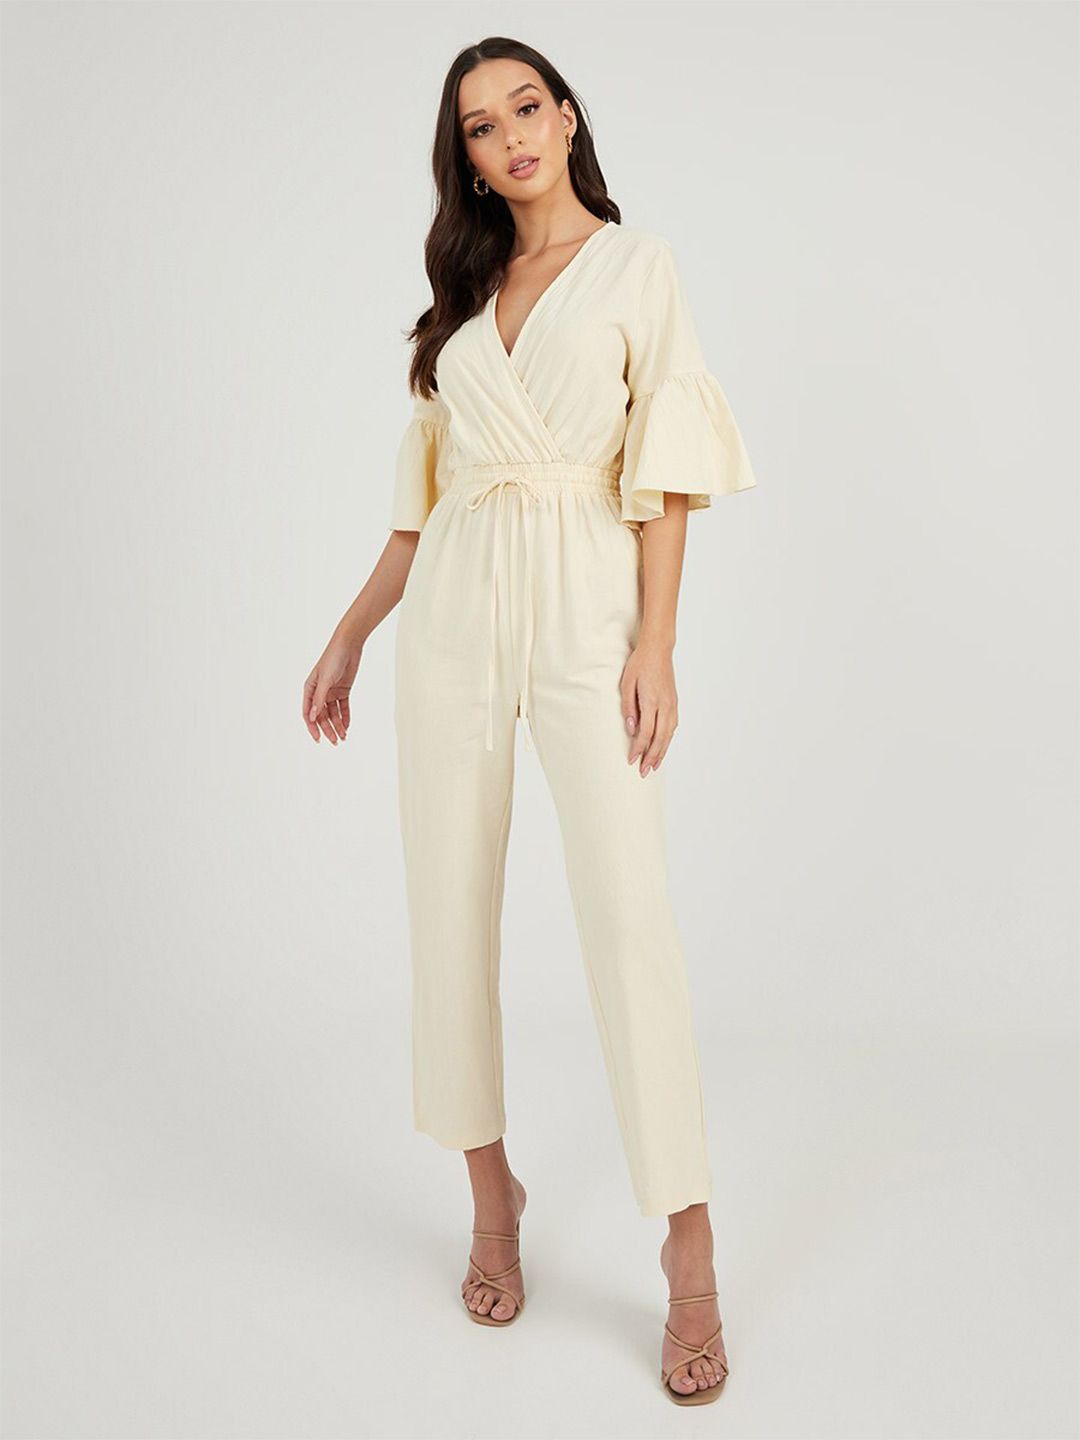 Styli White Basic Jumpsuit Price in India